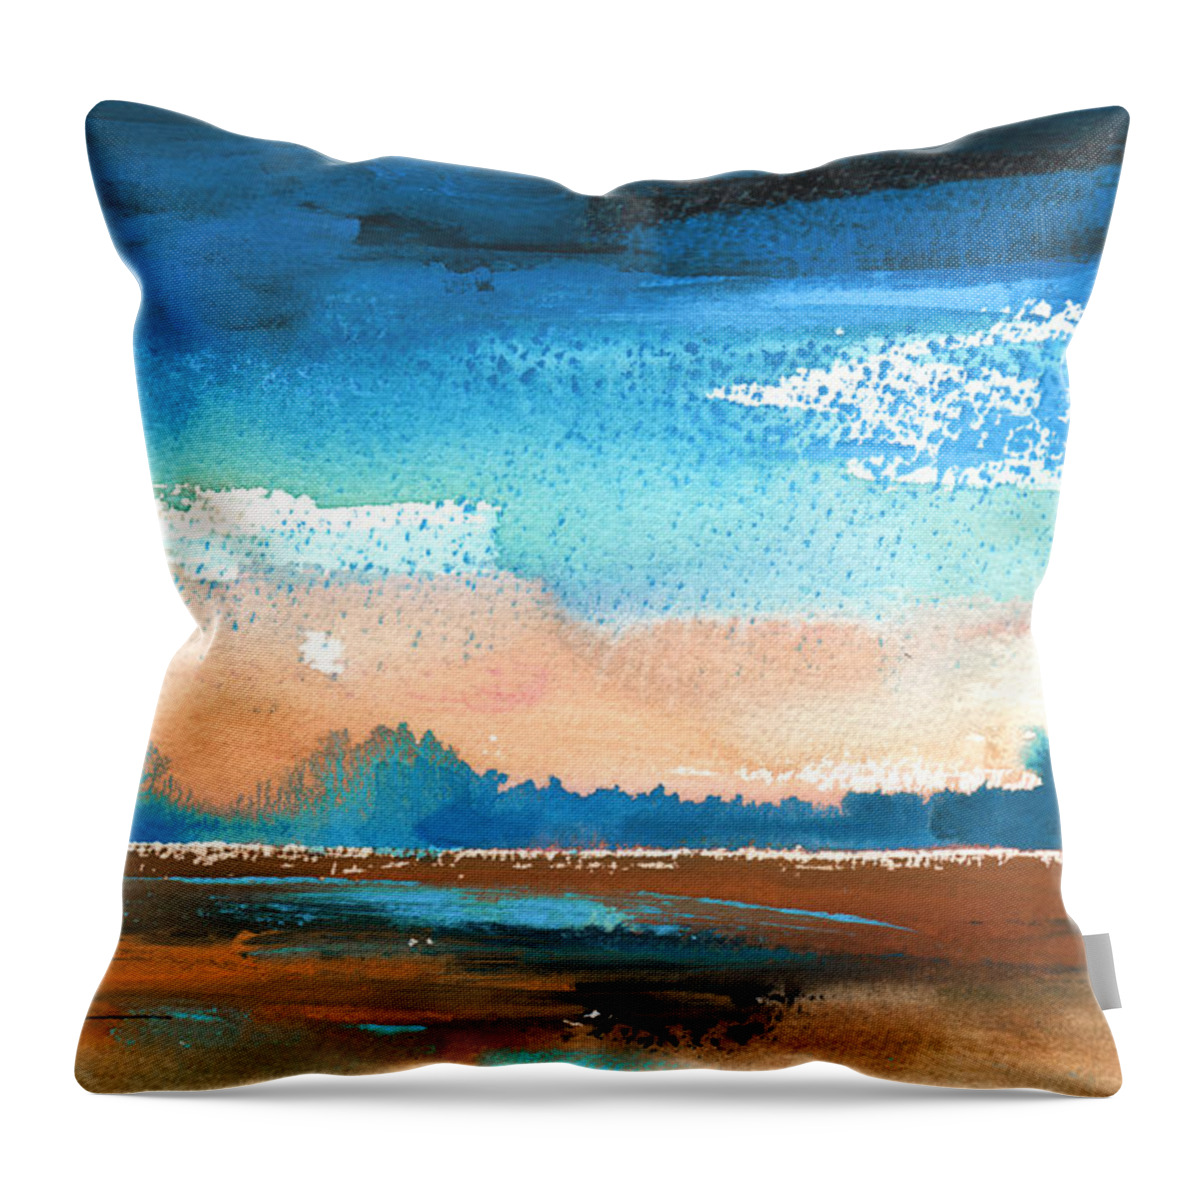 Landscape Throw Pillow featuring the painting Nightfall 36 by Miki De Goodaboom